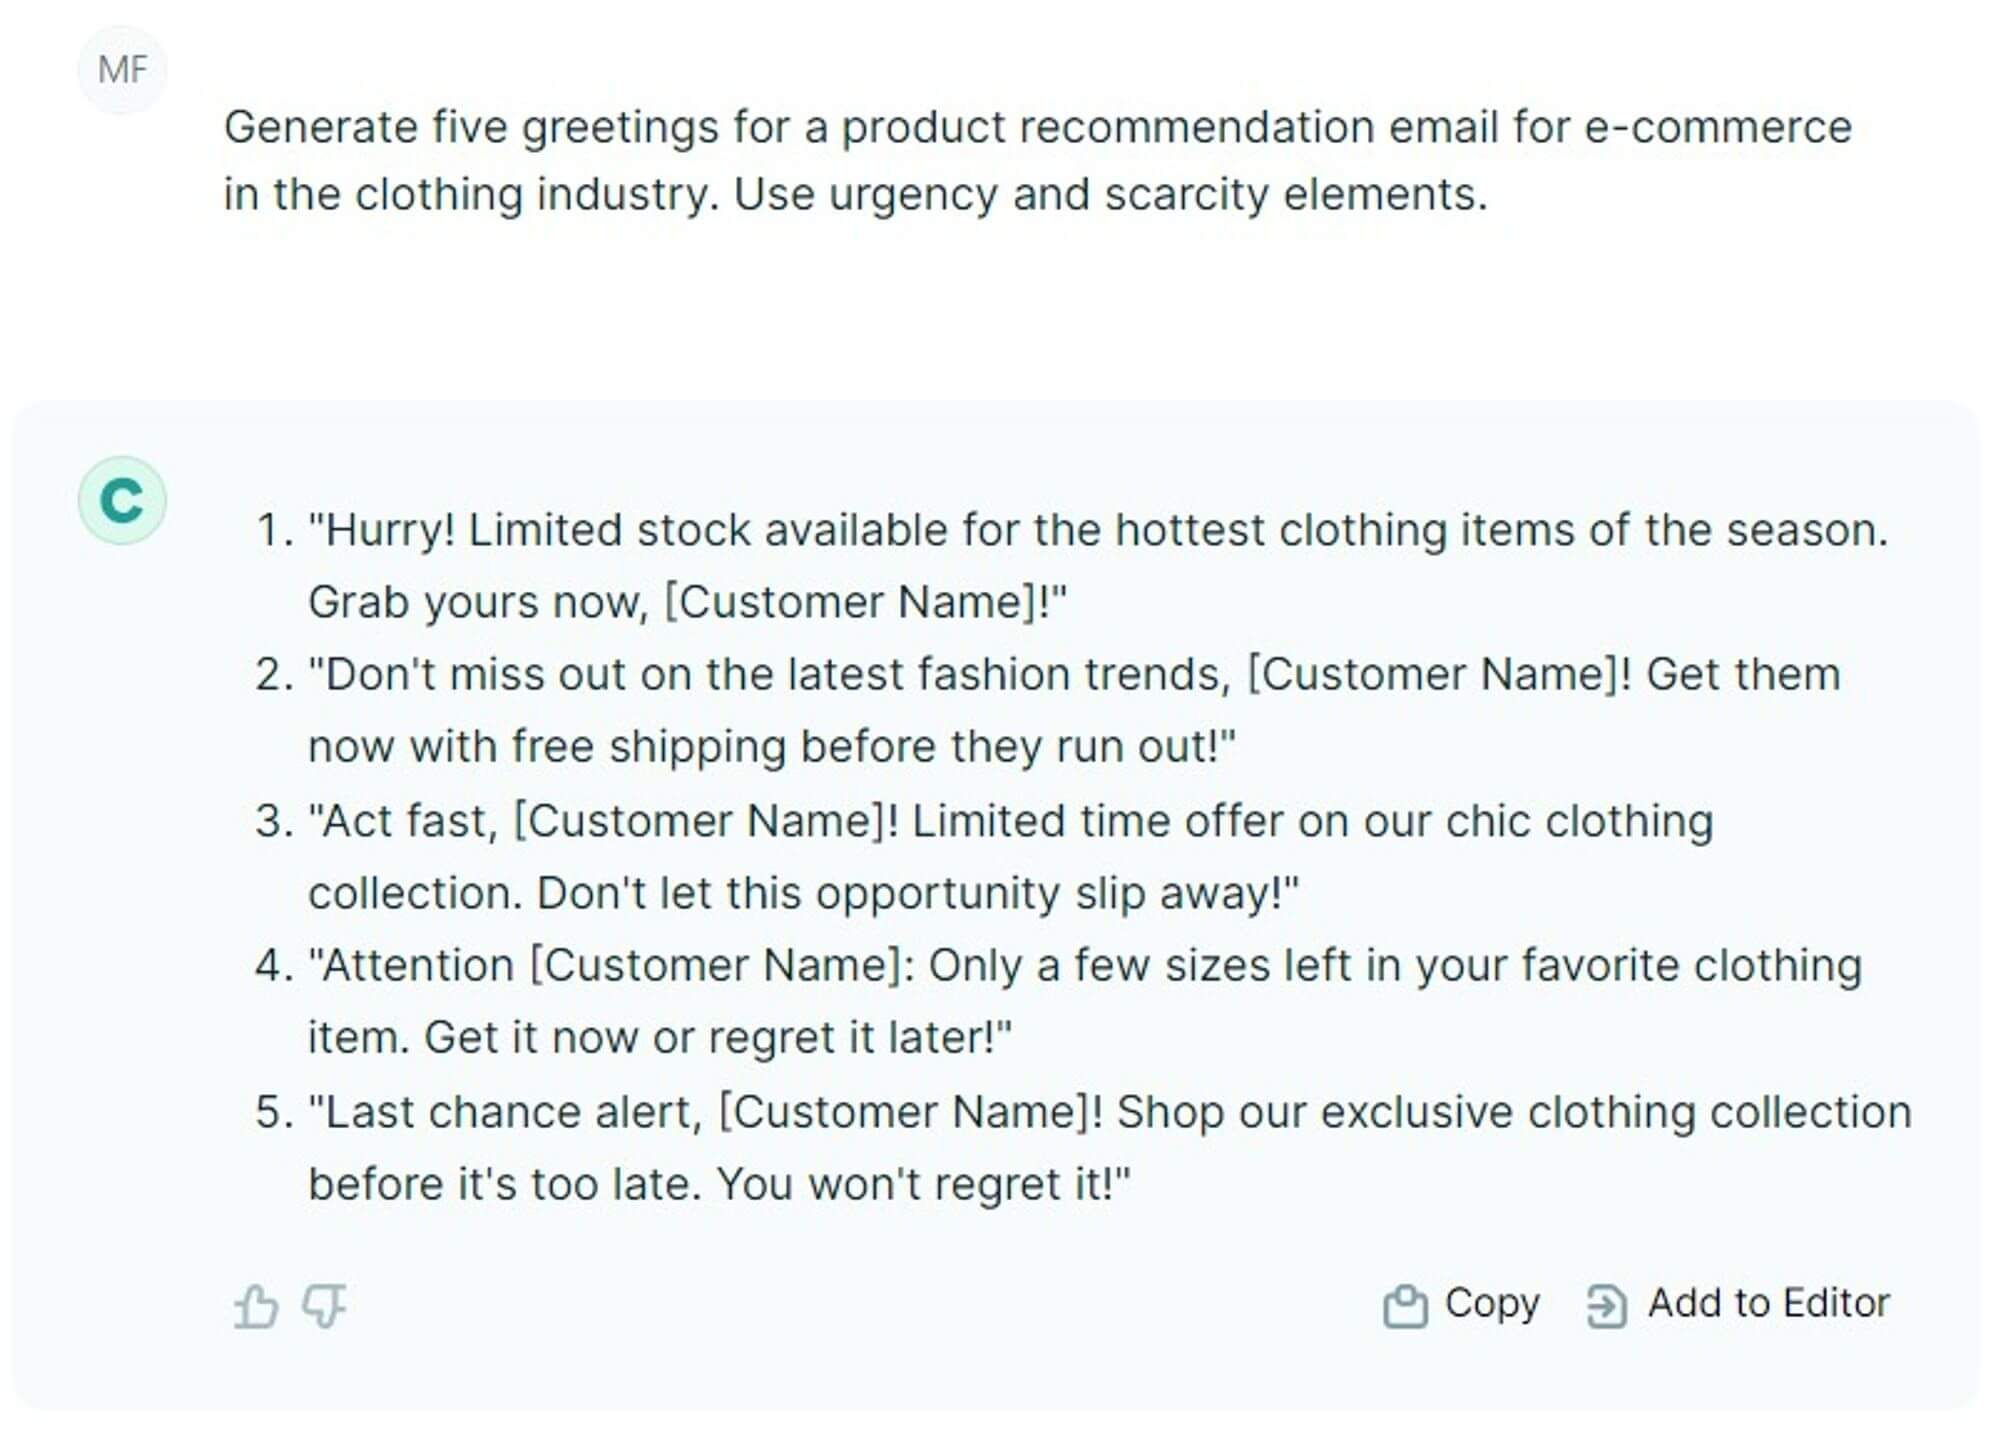 Product recommendation email suggestions with scarcity and urgency elements